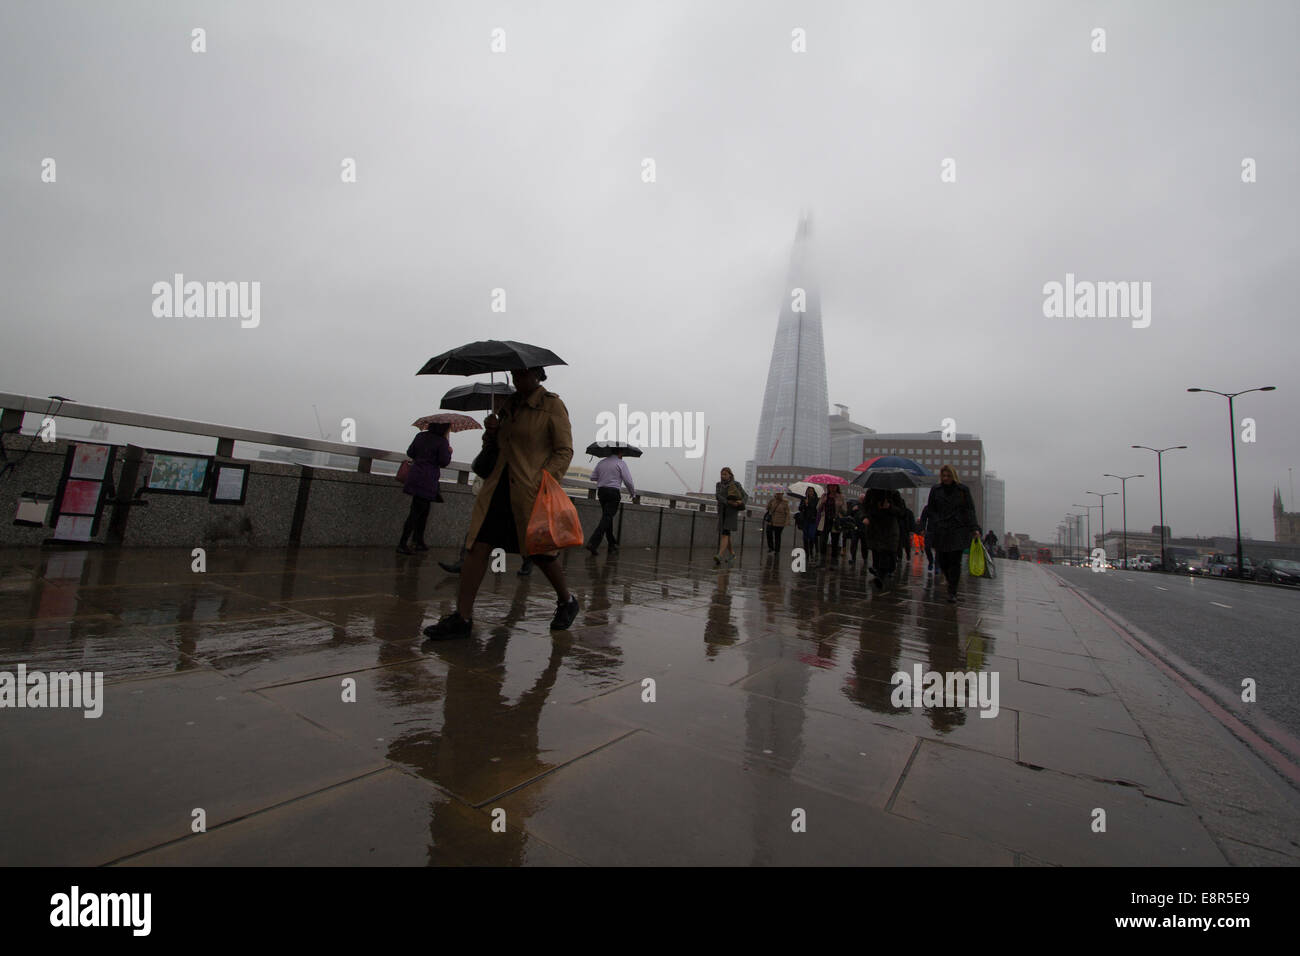 People walk over London Bridge with  Shard in background in rain, fog and mist Stock Photo